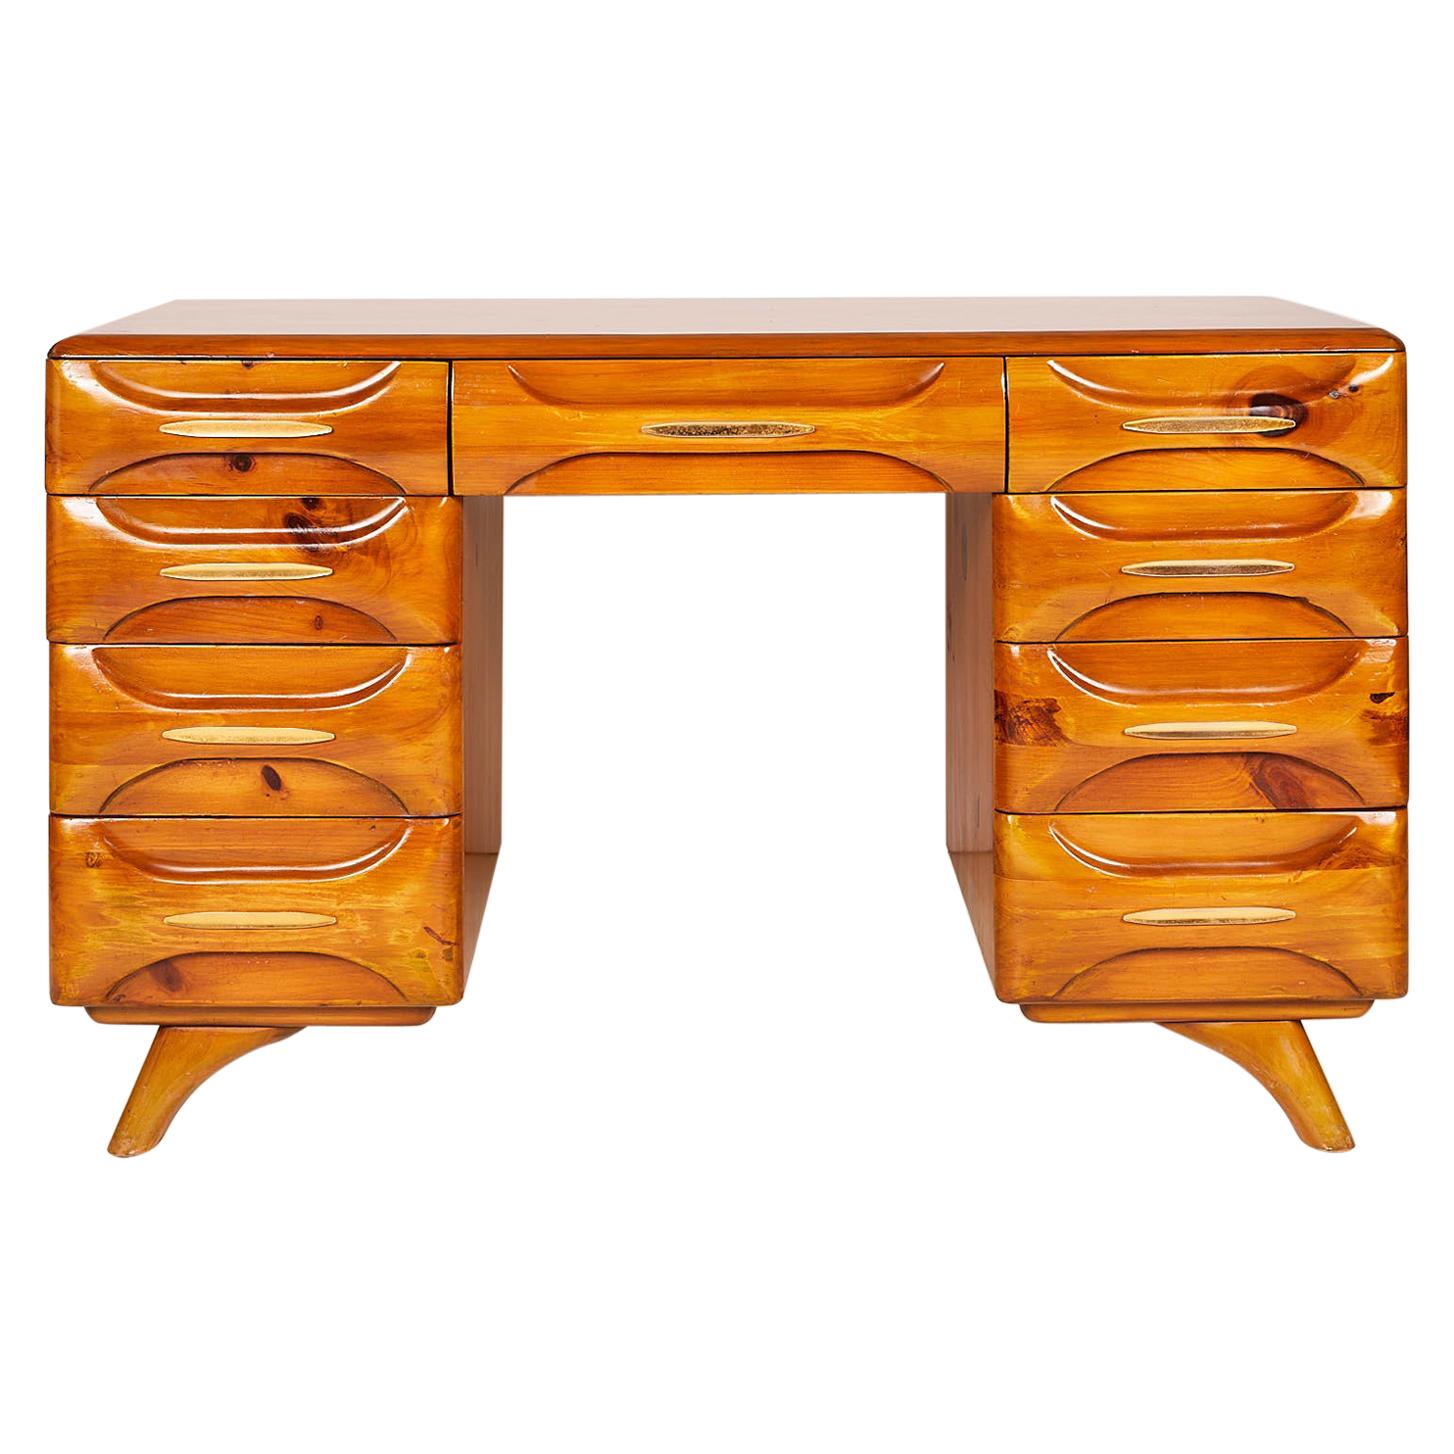 Midcentury Sculptured Pine Desk by the Franklin Shockey Company